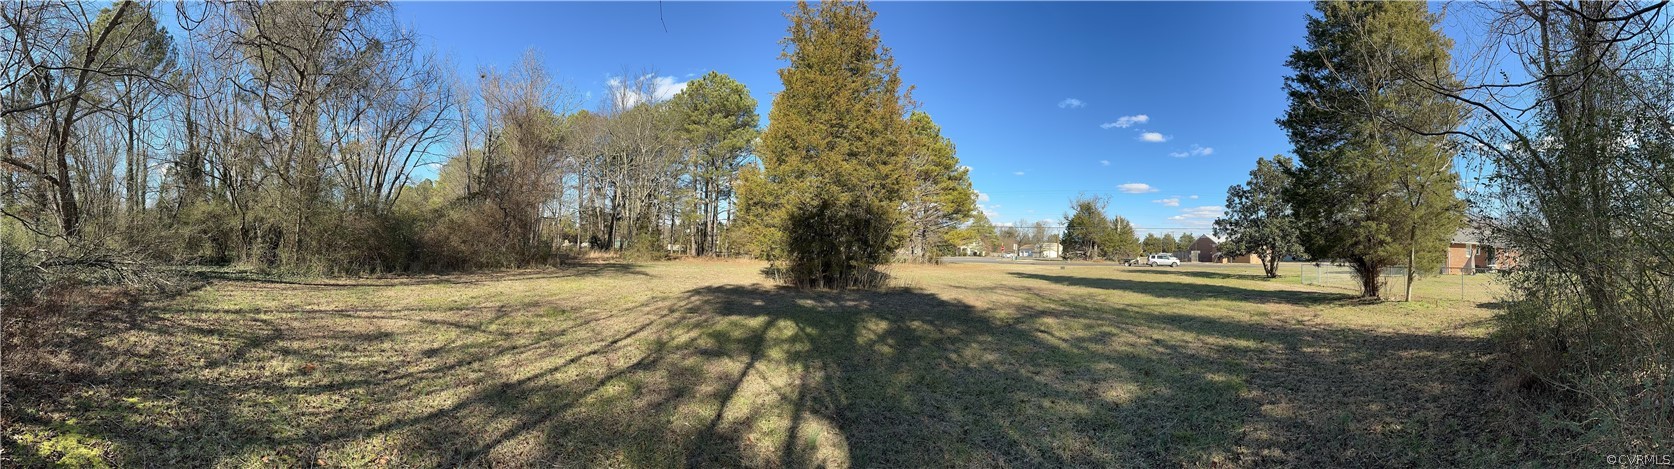 8100 Buffin Rd, Henrico, Virginia 23231, ,Land,For sale,8100 Buffin Rd,2301987 MLS # 2301987